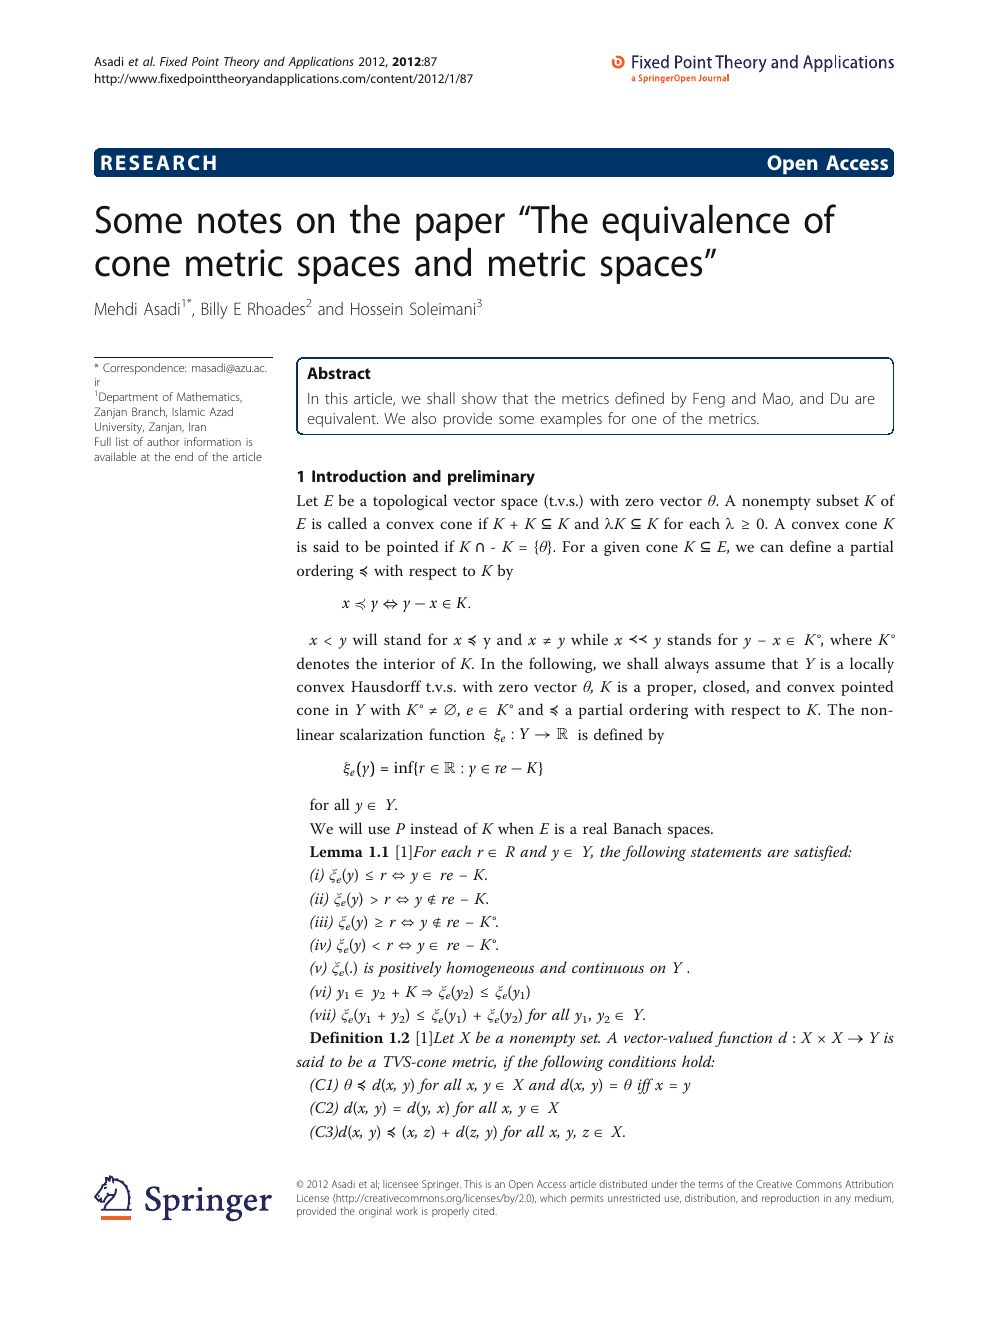 Some Notes On The Paper The Equivalence Of Cone Metric Spaces And Metric Spaces Topic Of Research Paper In Mathematics Download Scholarly Article Pdf And Read For Free On Cyberleninka Open